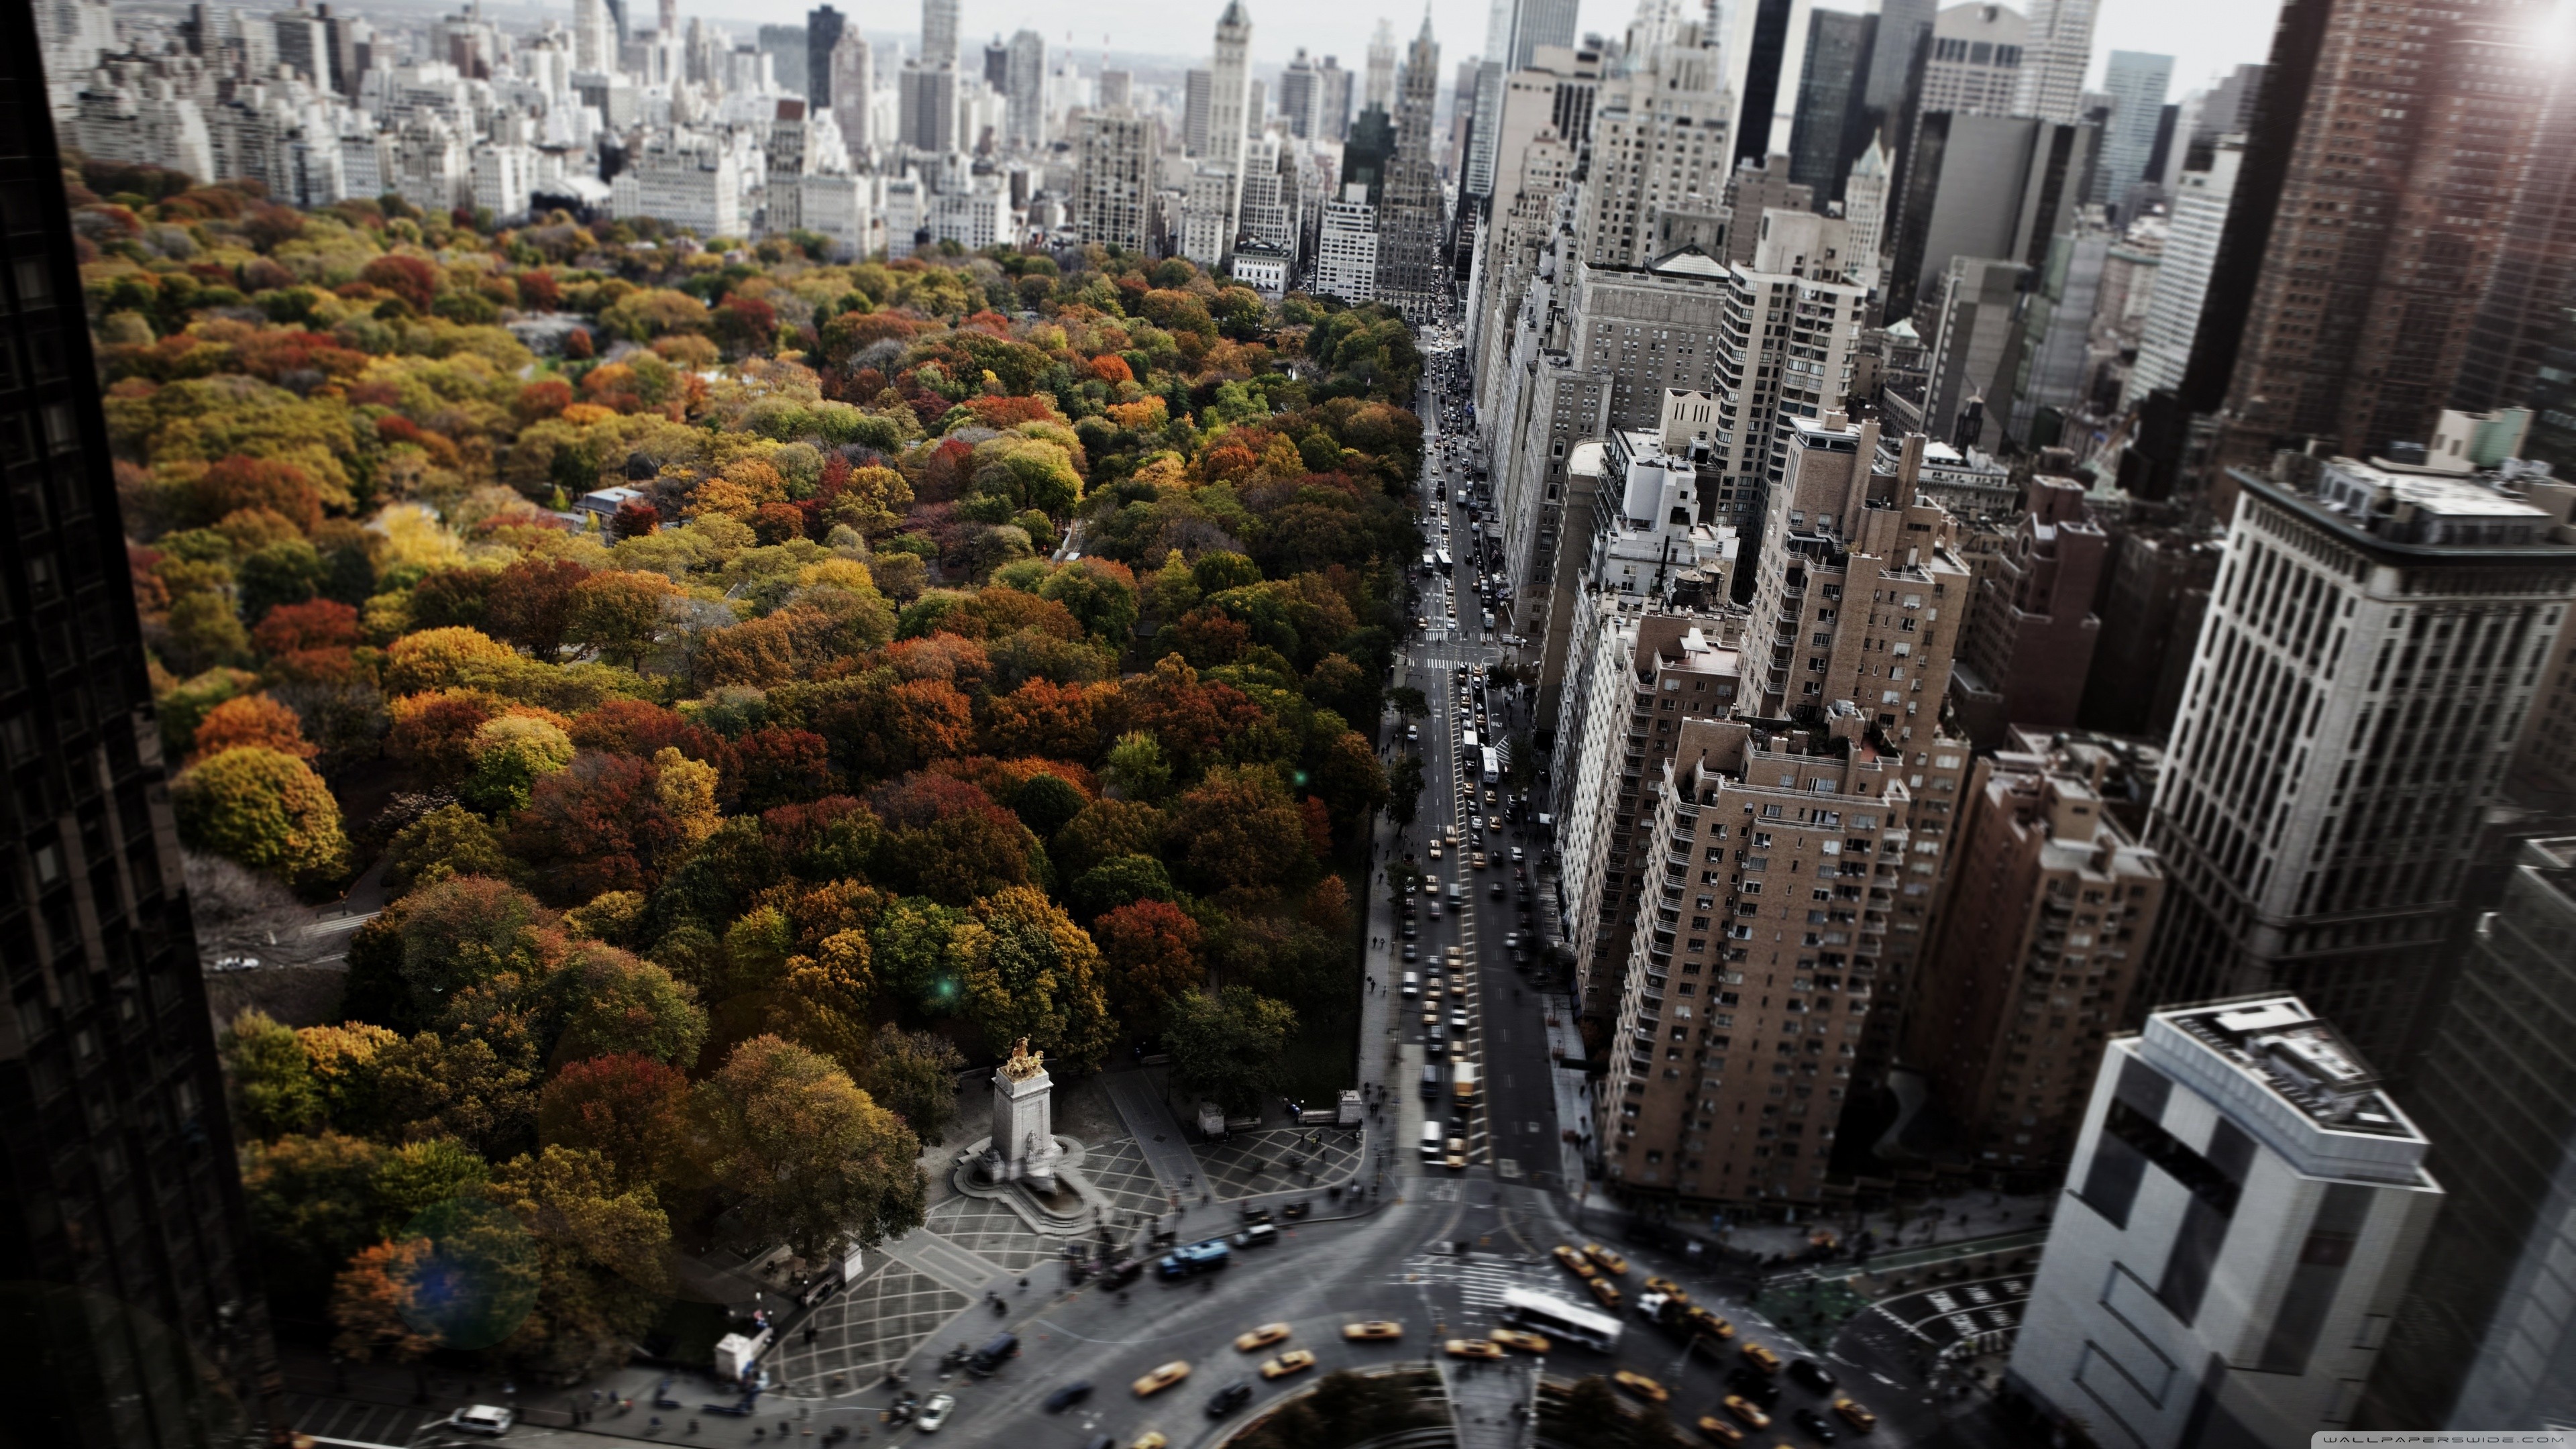 architecture, City, Cityscape, Trees, Building, New York City, USA, Street, Park, Car, Central Park, Taxi, Skyscraper, Fall, Blurred, Birds Eye View, Window, Roundabouts, Urban Wallpaper